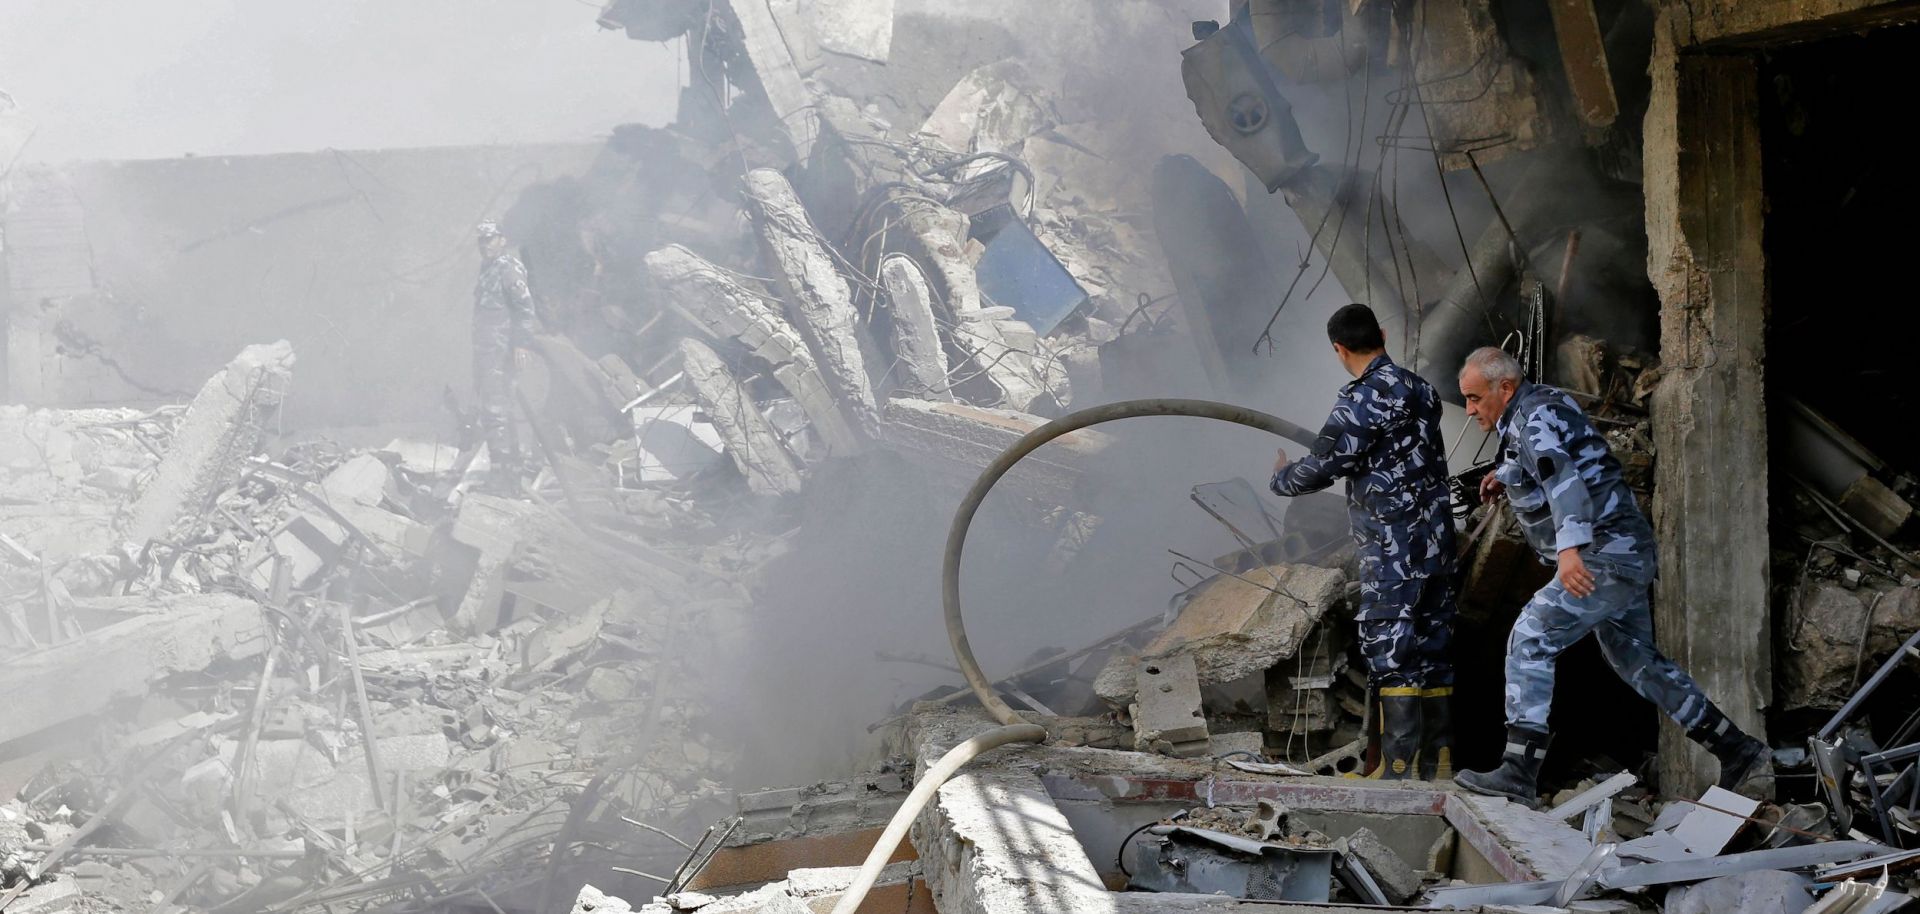 Syrian soldiers inspect the wreckage of a building on April 14, 2018, after the United States, Britain and France launched strikes against Syrian government targets in response to an alleged chemical weapons attack.